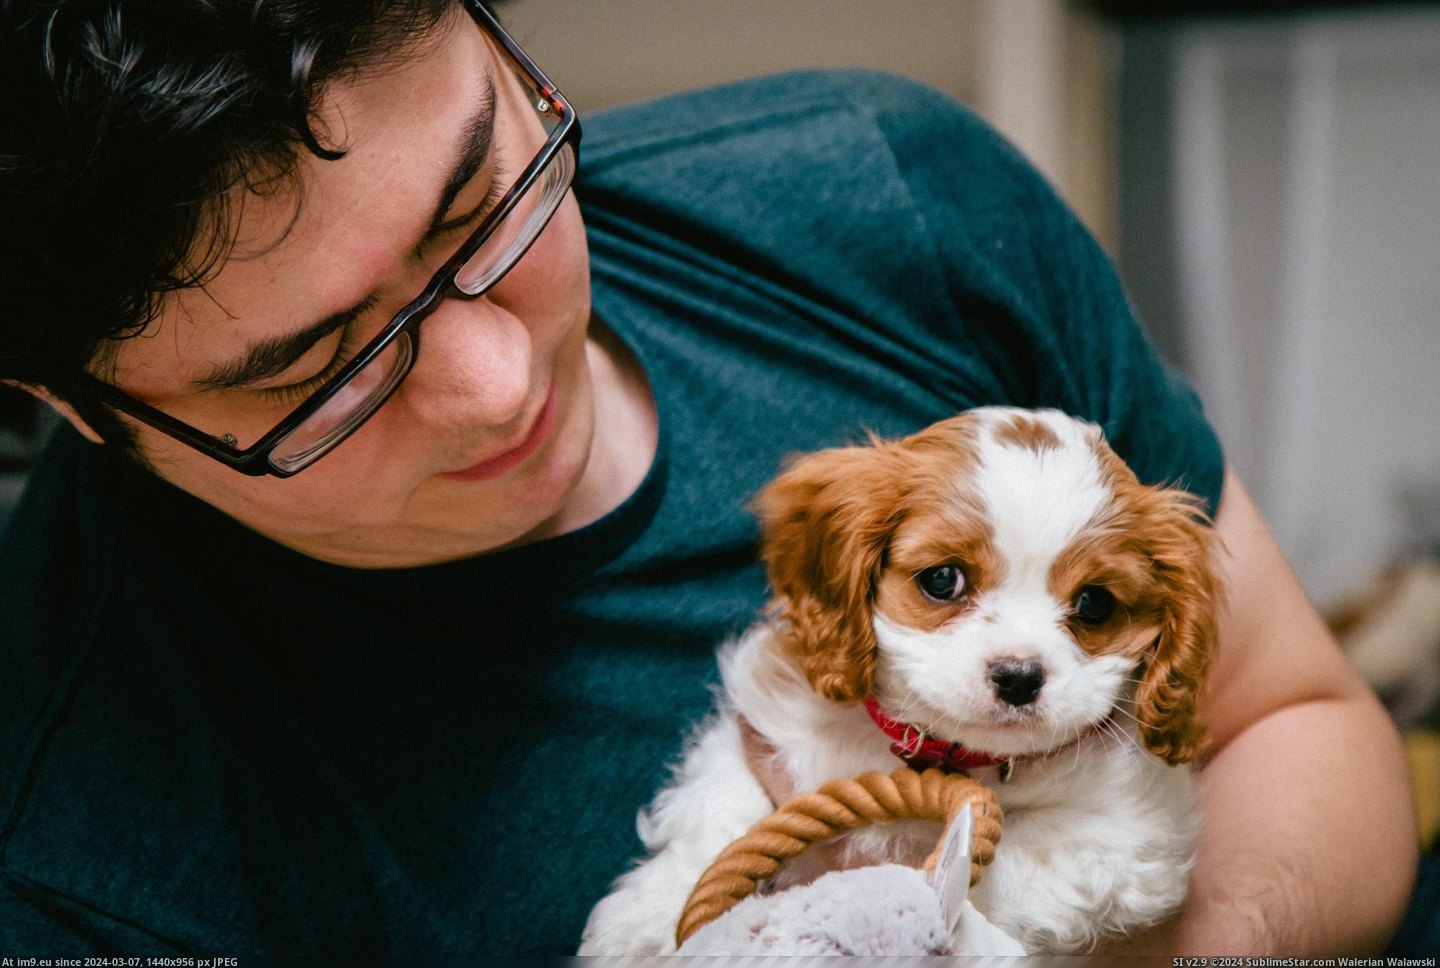 #Old #New #She #Our #Nami #Cavalier #Spaniel #Week #King #Say #Charles [Aww] Please say hello to Nami! She's our new 8-week old Cavalier King Charles Spaniel. 9 Pic. (Image of album My r/AWW favs))